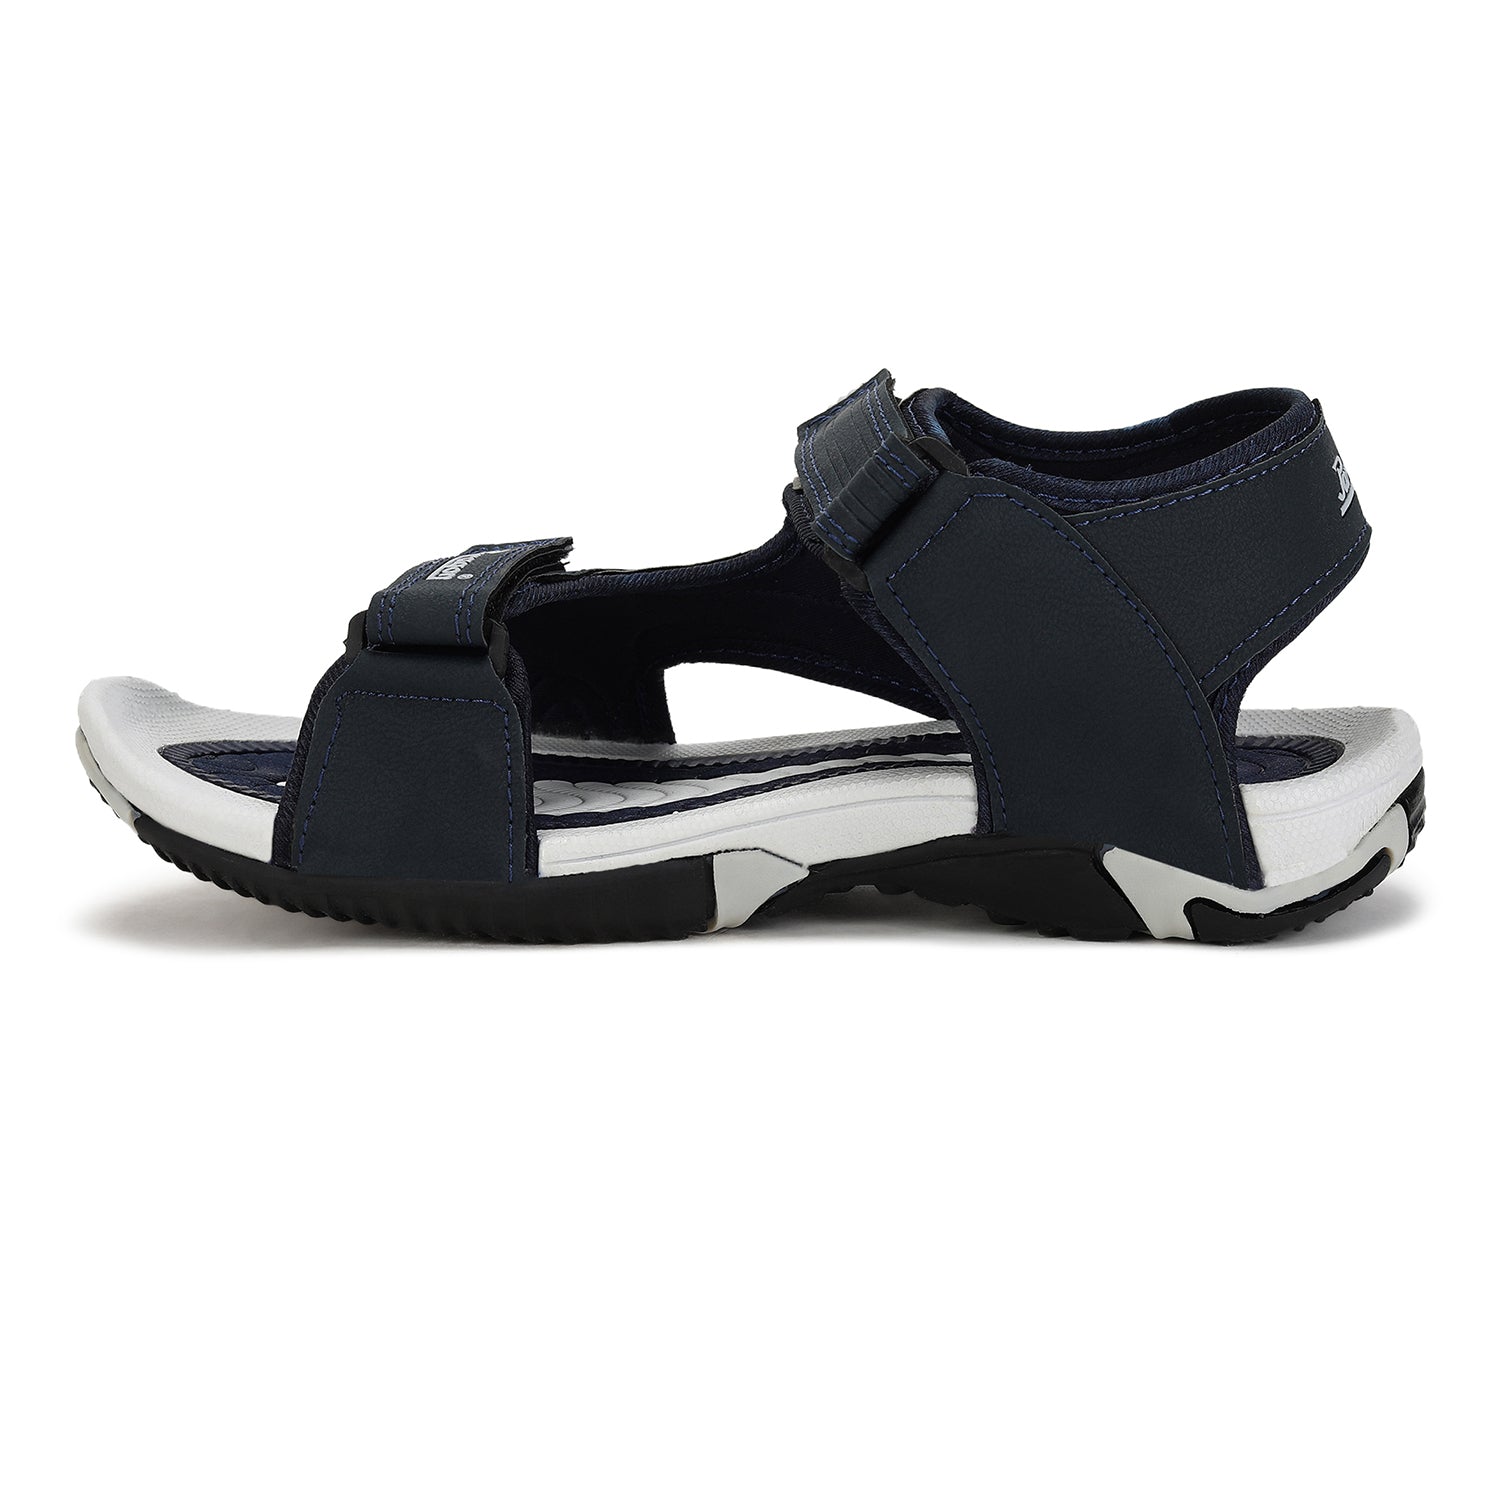 Paragon K1405G Men Stylish Sandals | Comfortable Sandals for Daily Outdoor Use | Casual Formal Sandals with Cushioned Soles